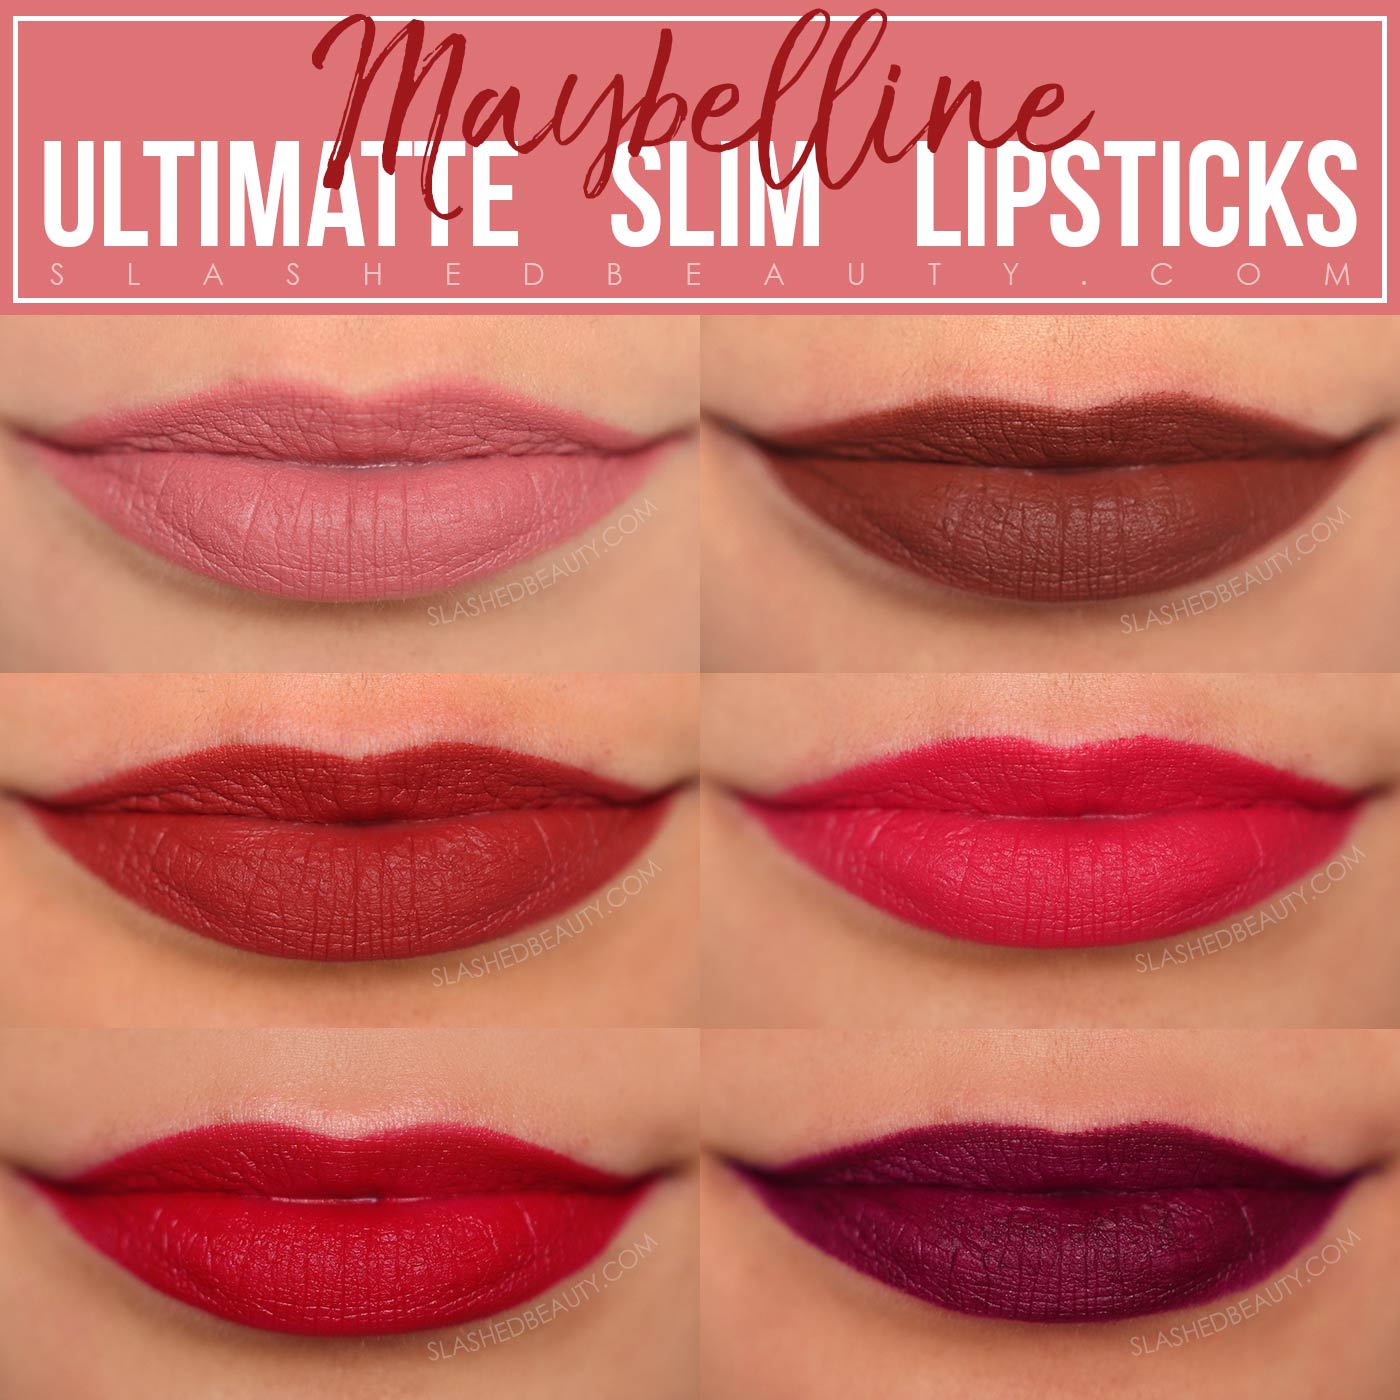 Maybelline Ultimatte Slim Lipsticks Swatches | More Buff, More Truffle, More Rust, More Magenta, More Ruby, More Berry | Slashed Beauty